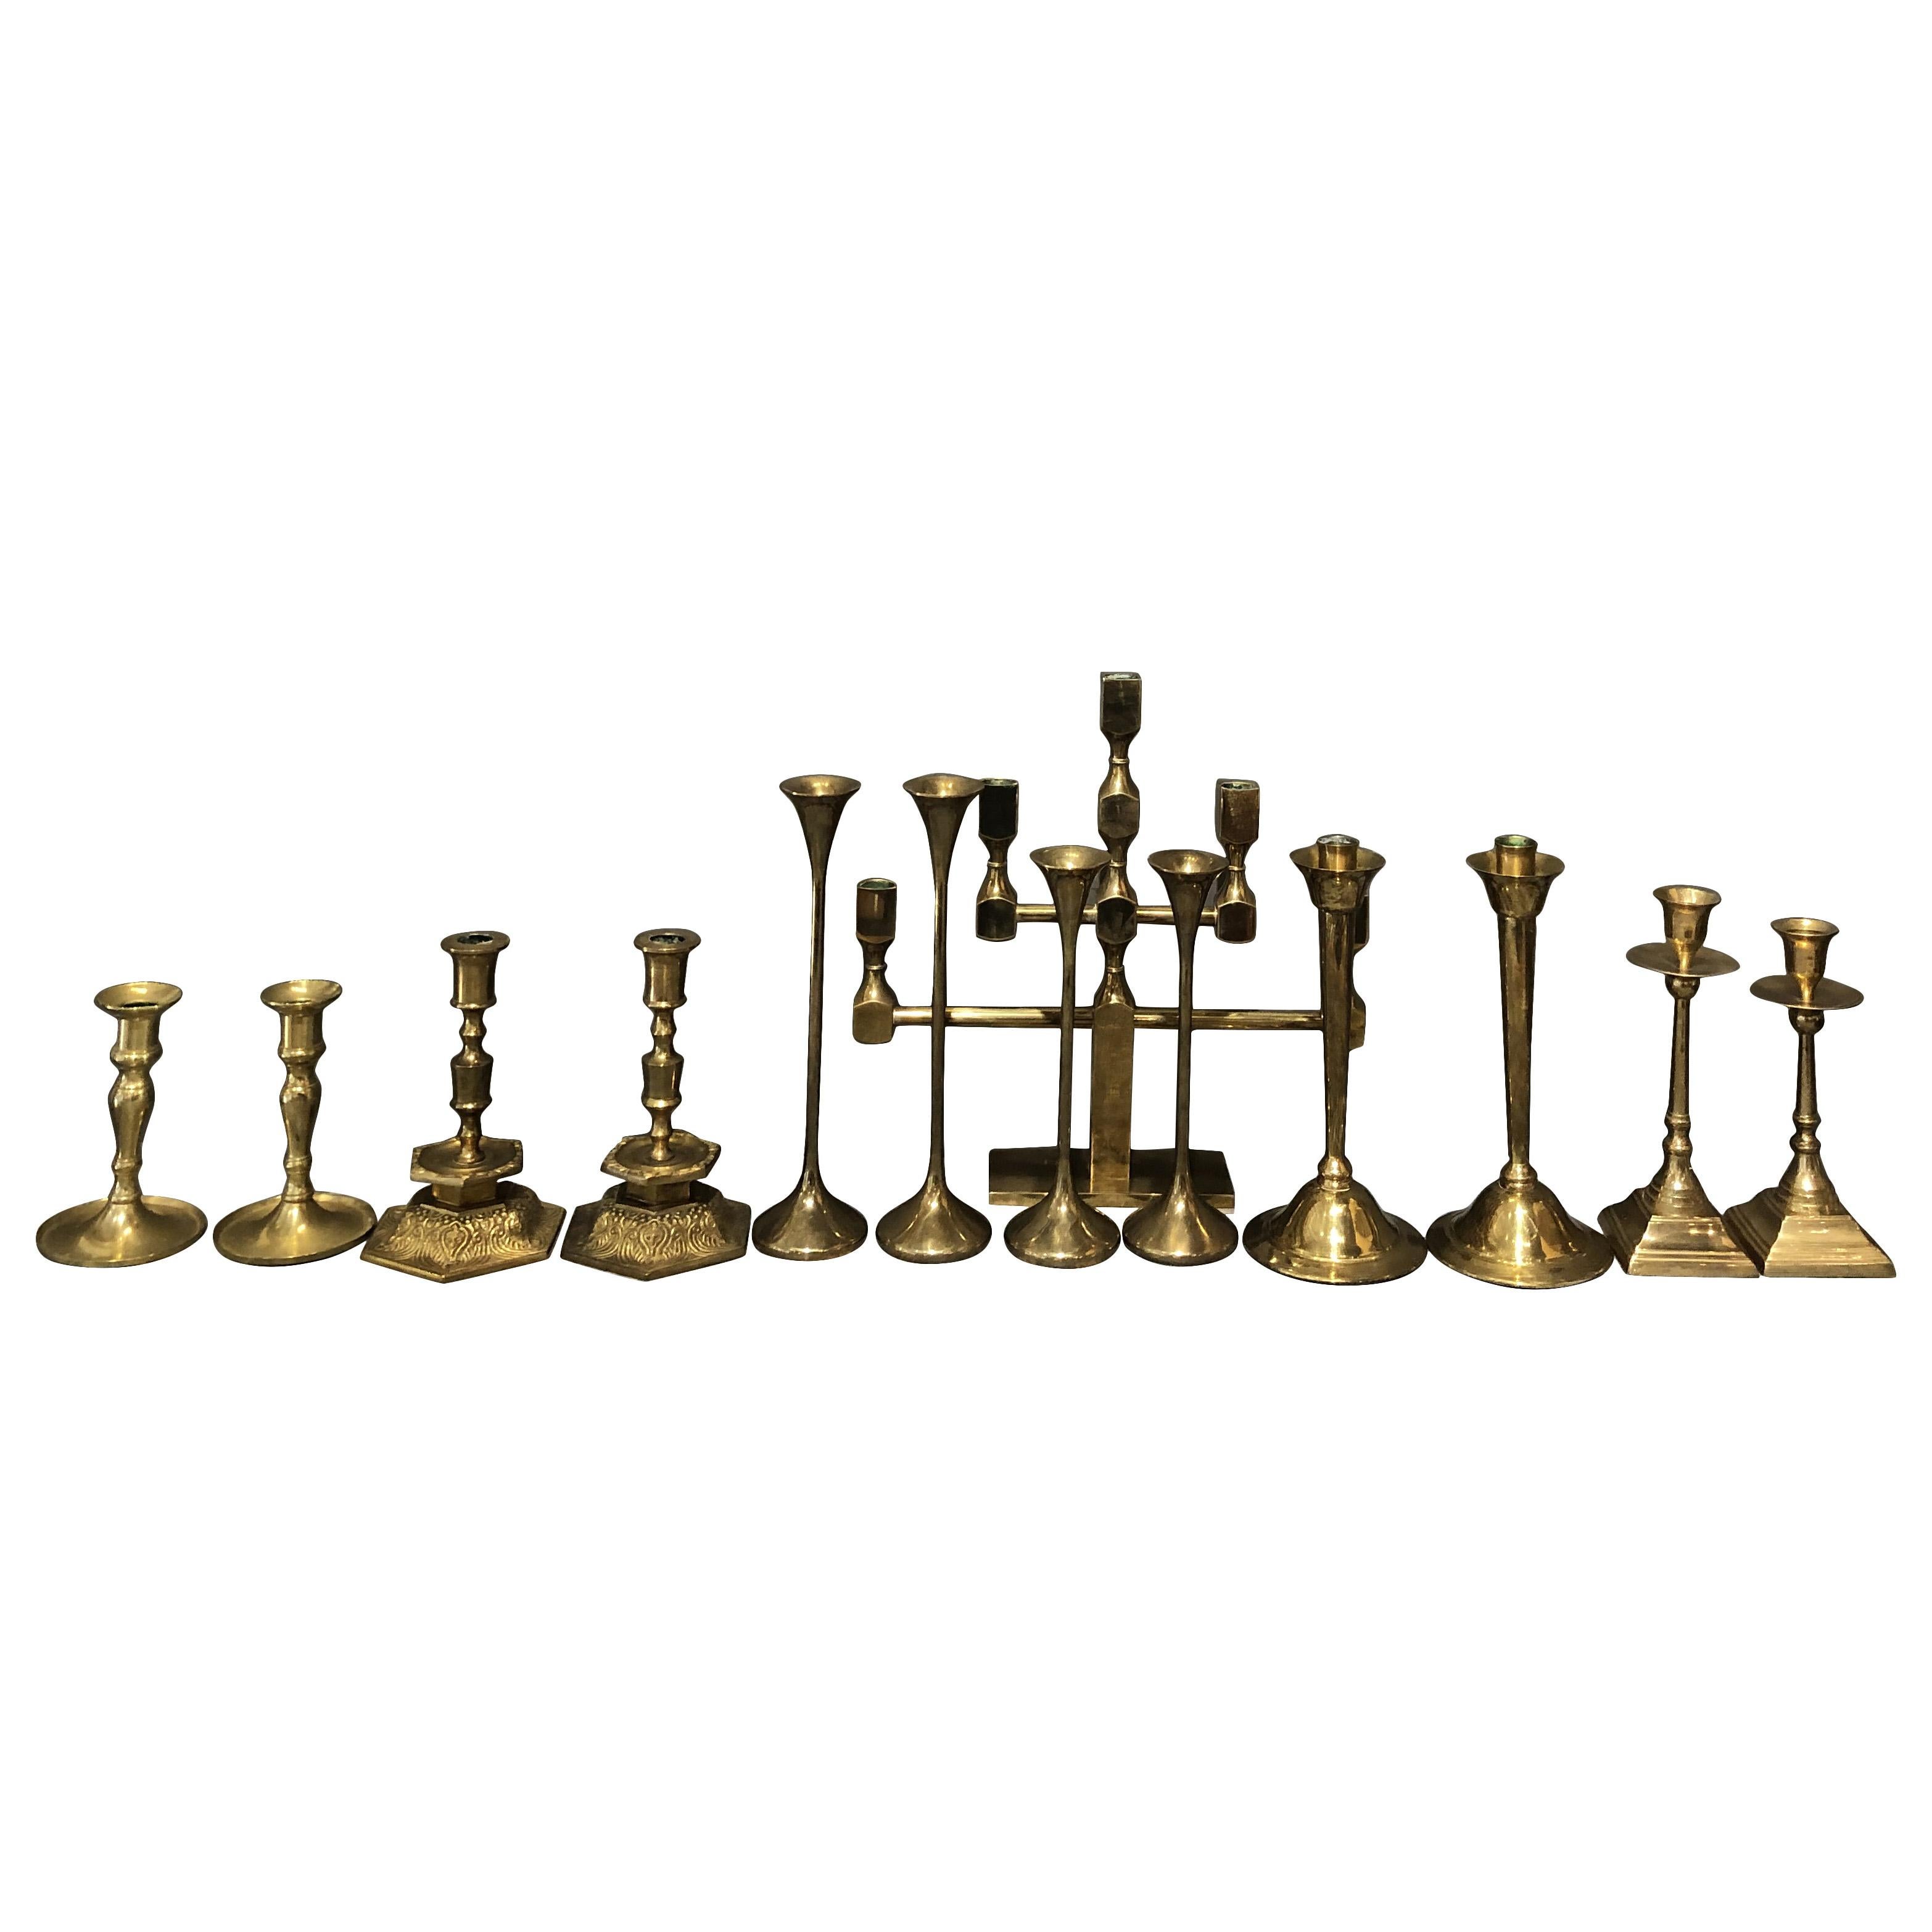 A vintage Mid-Century Modern set of fourteen finely worked candlesticks in a variety of shapes in brass, in good condition. Wear consistent with age and use, circa 1950, Sweden and Denmark, Scandinavia.